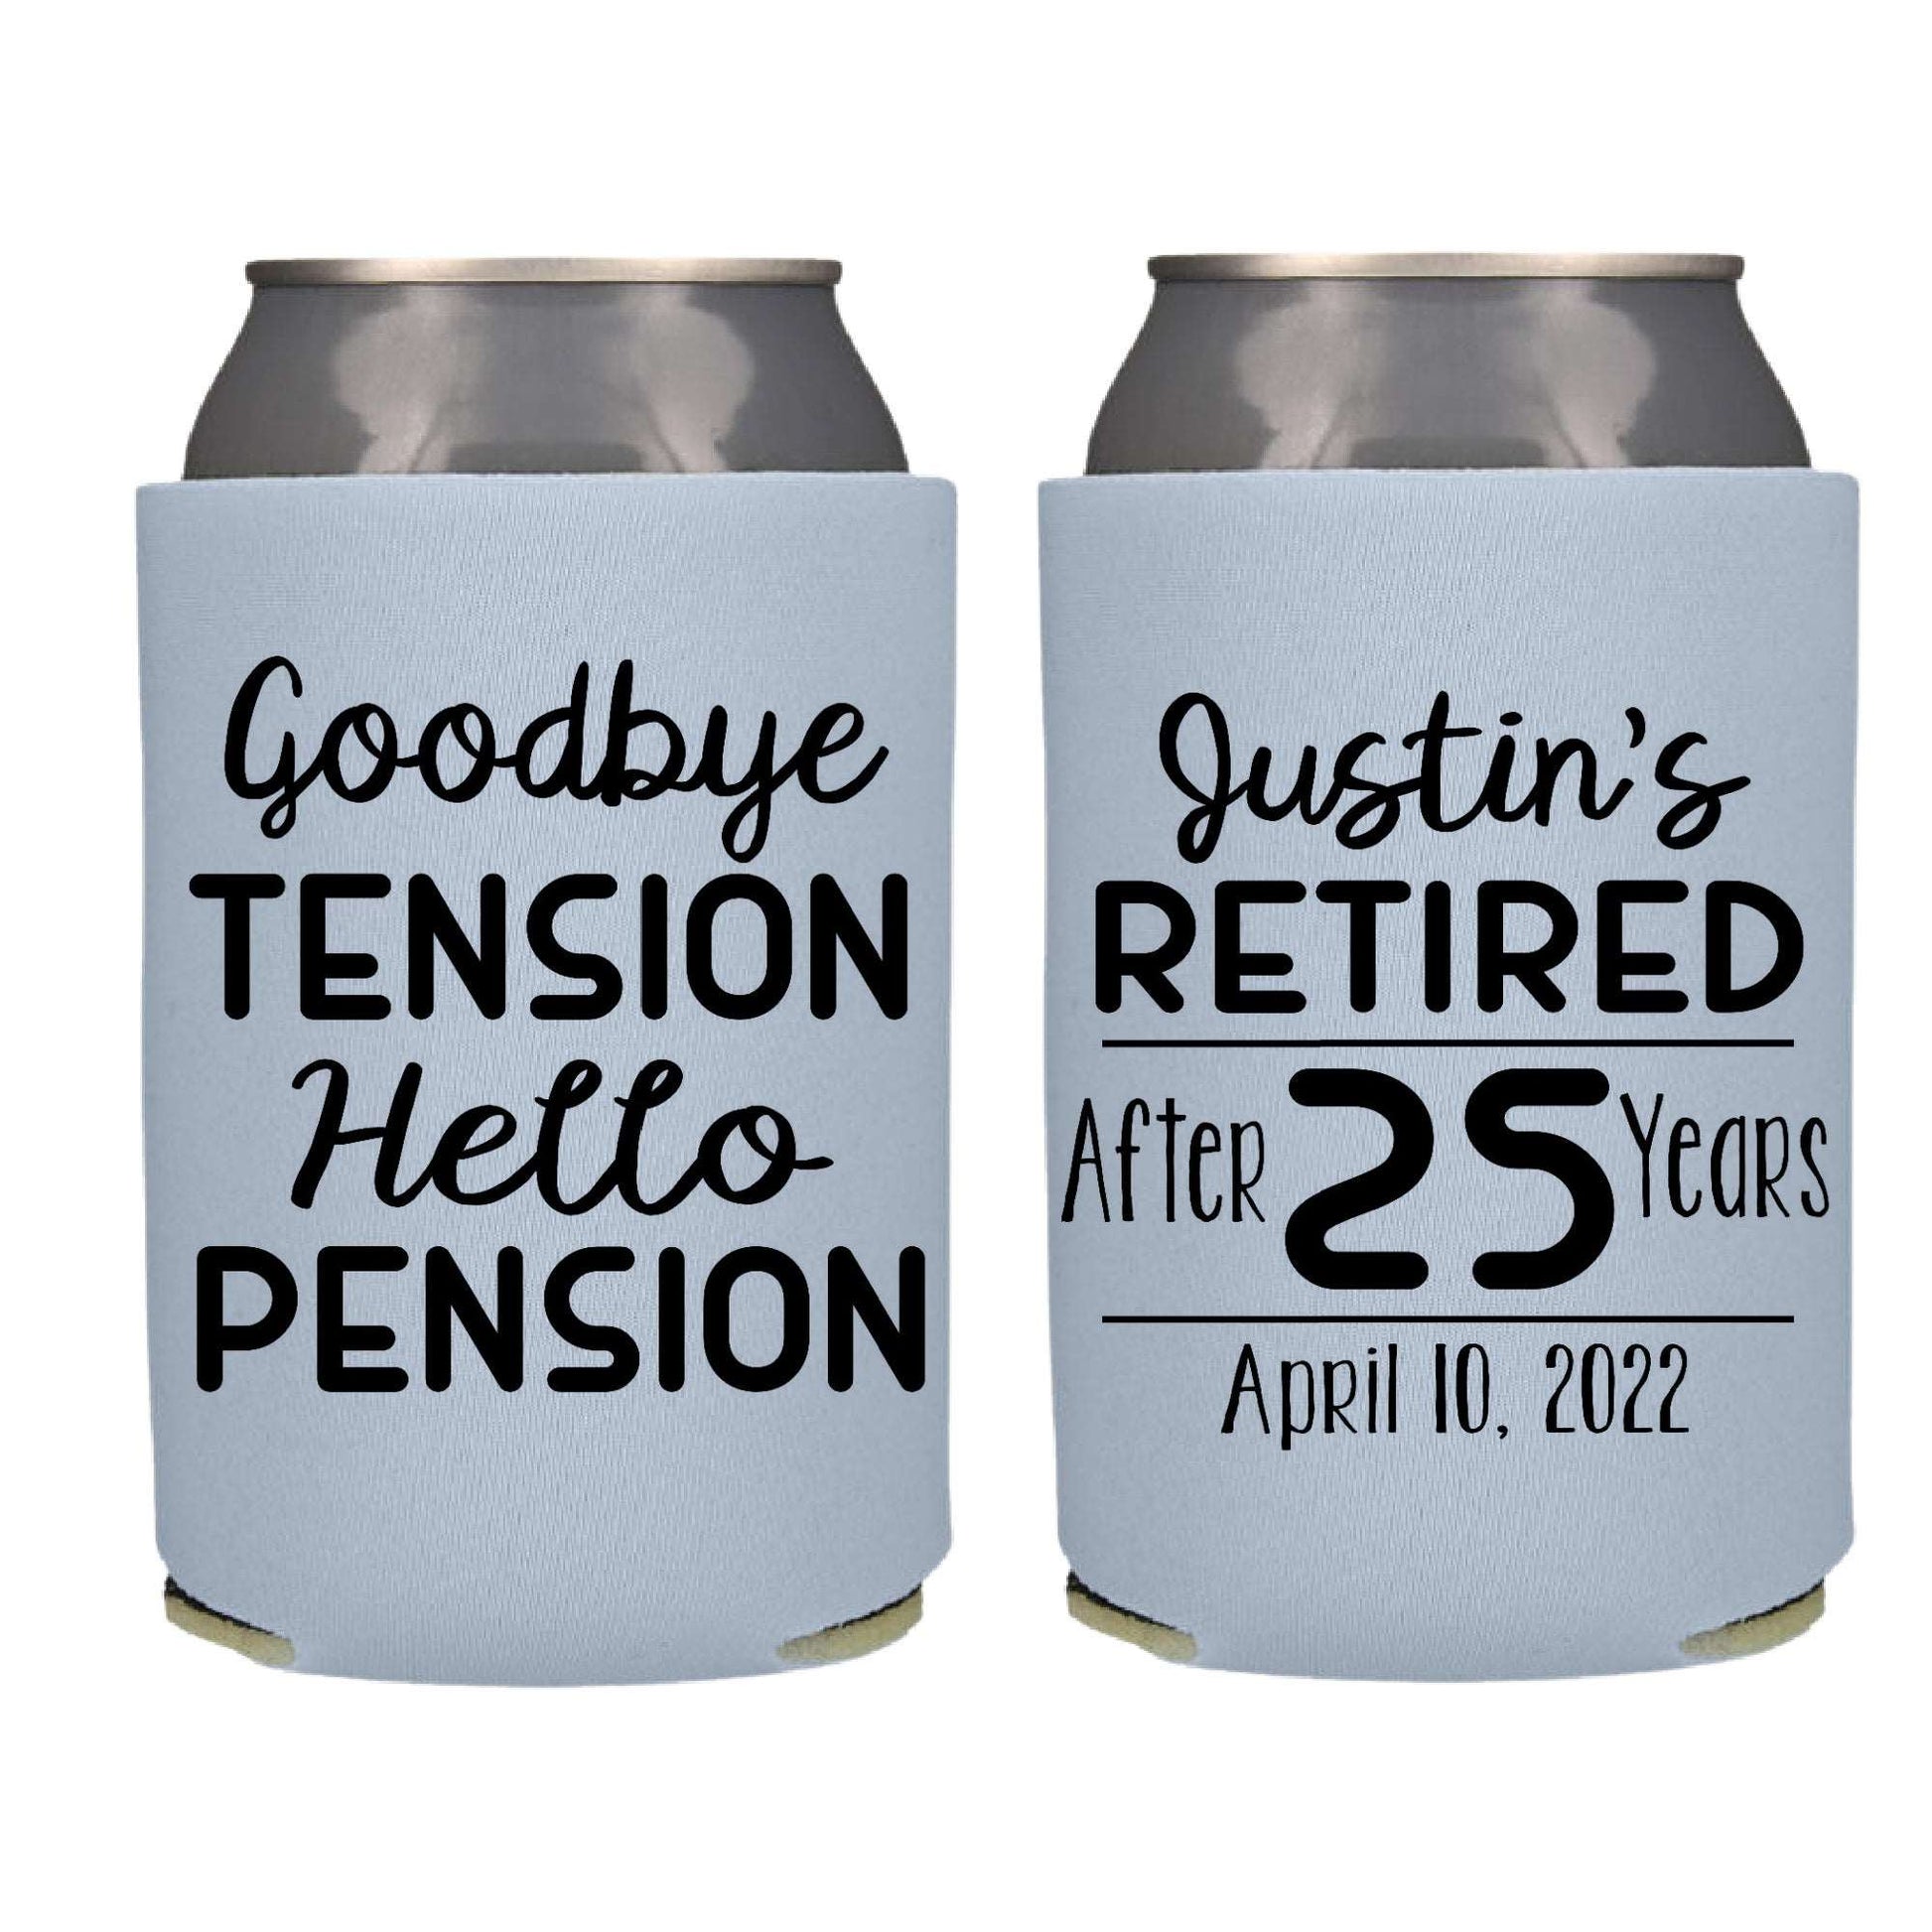 Goodbye Tension Hello Pension Retirement Screen printed Can Cooler